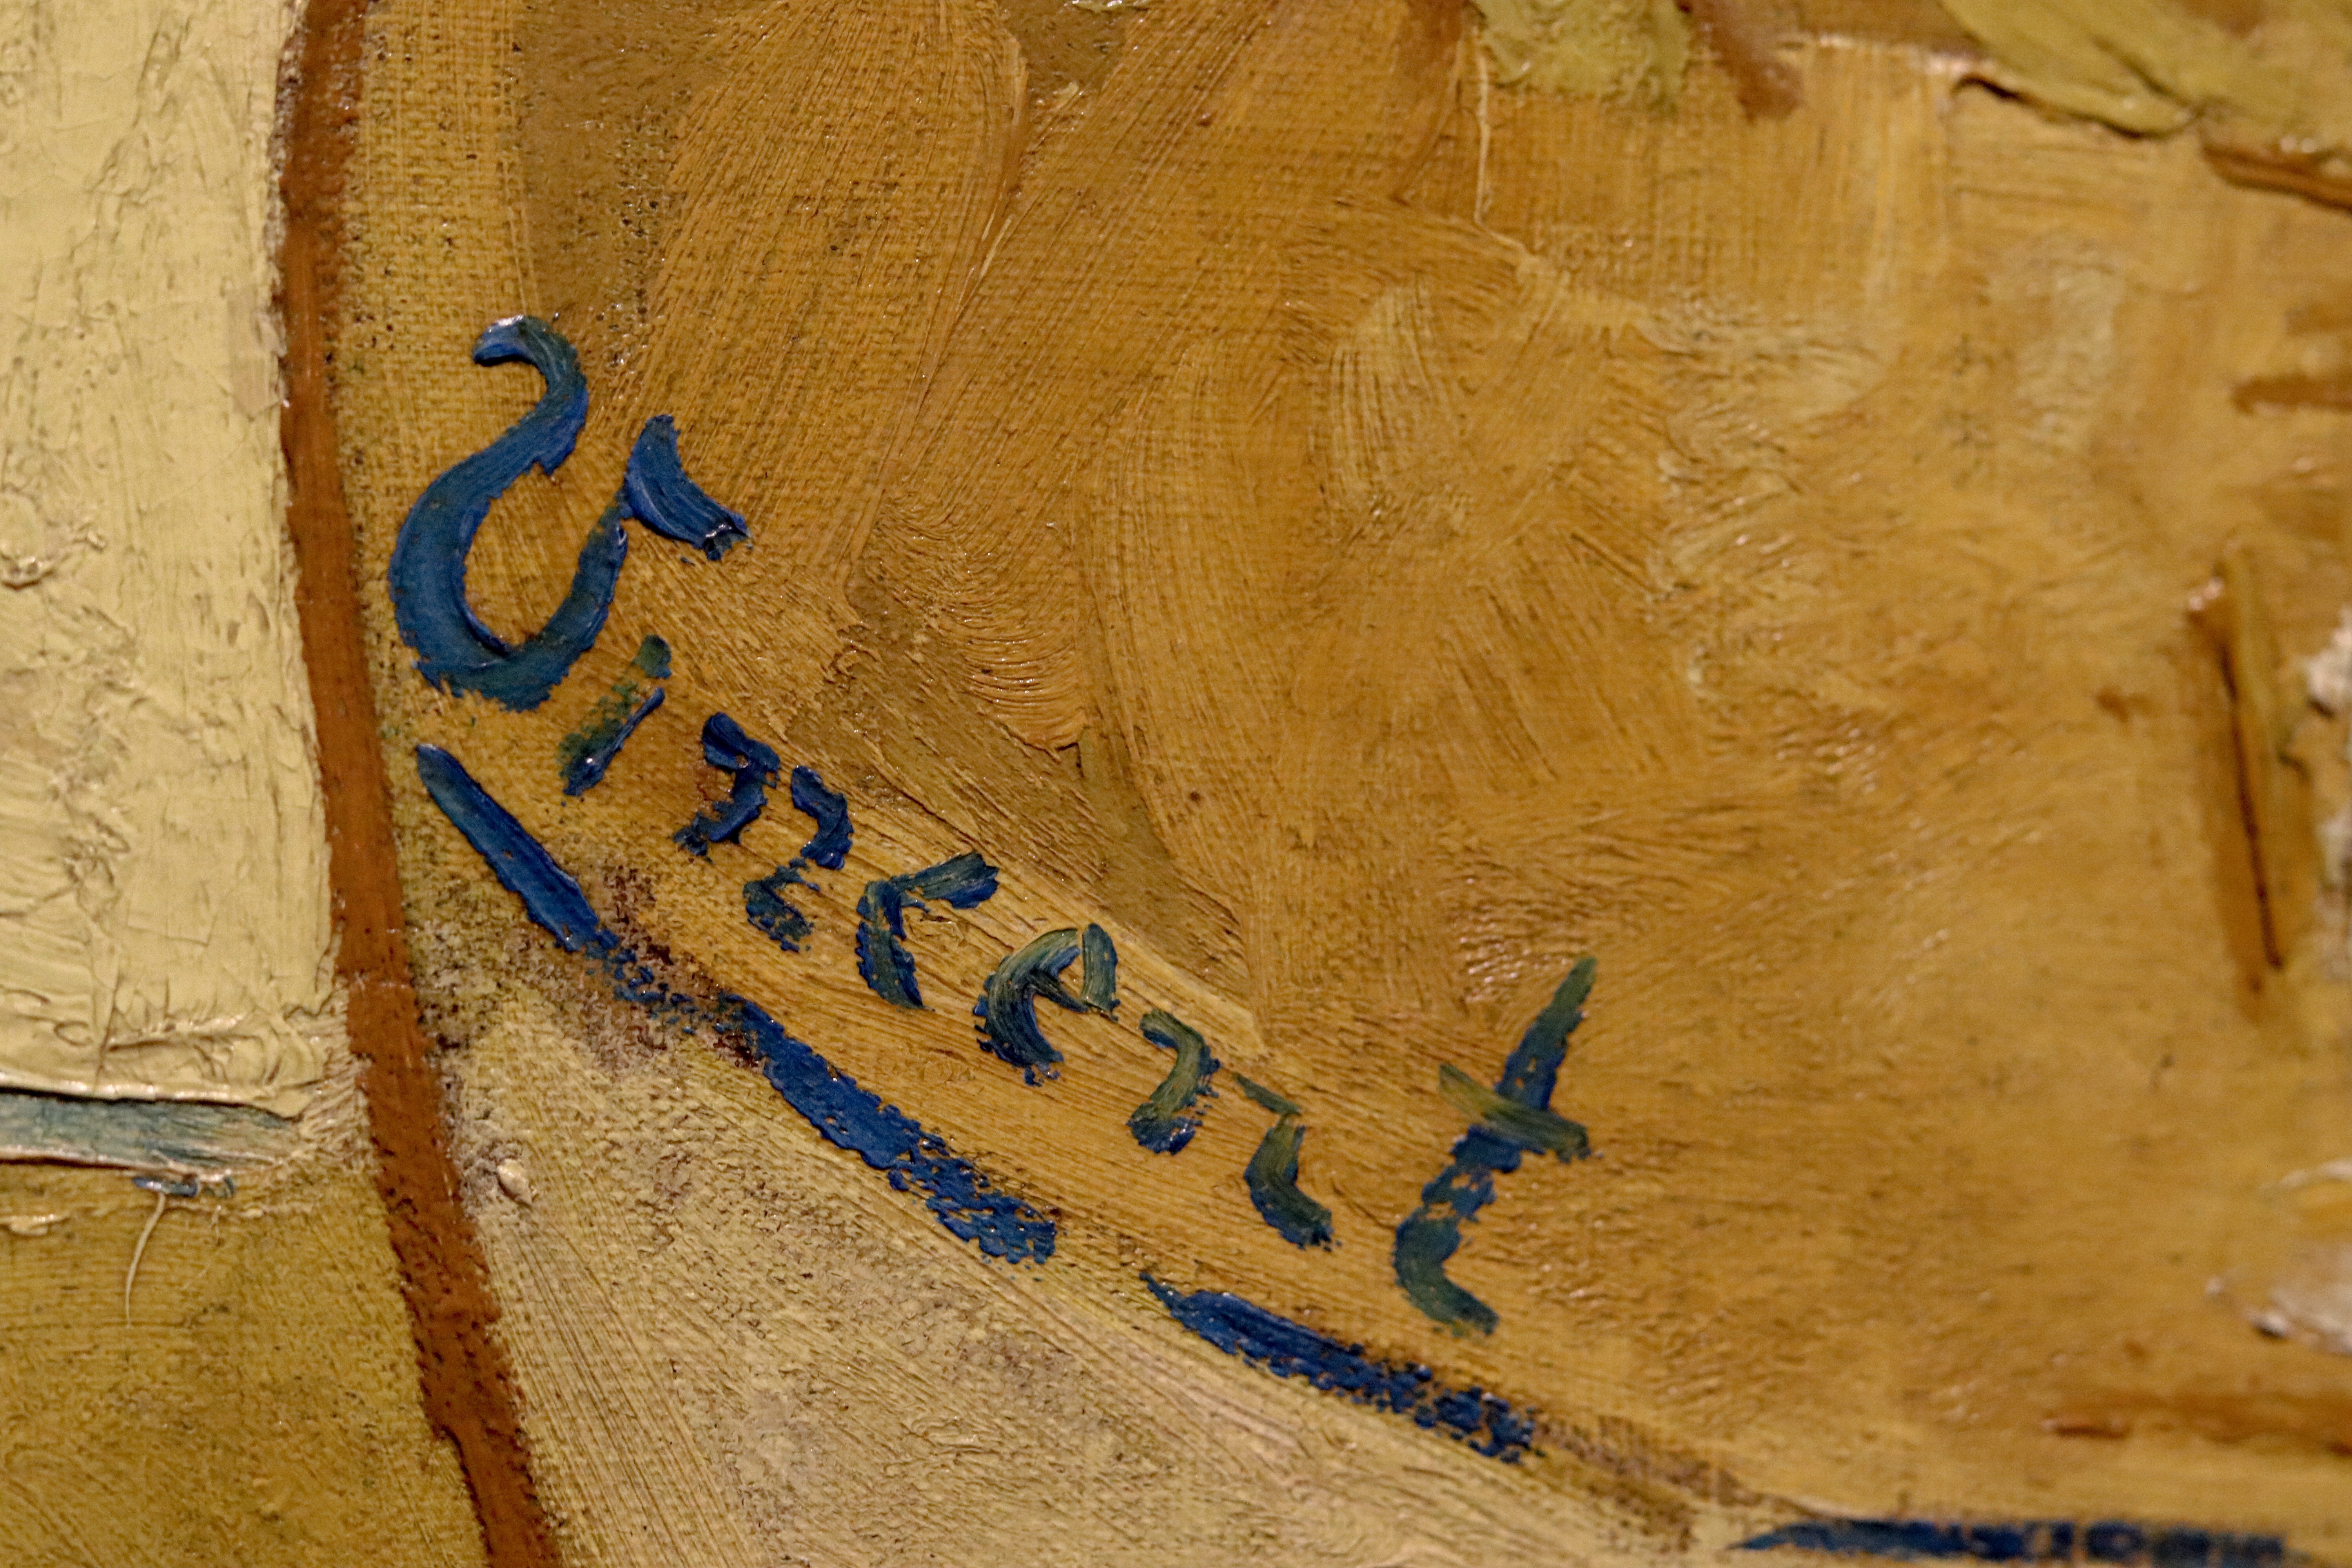 Close up of ‘Vincent’ painted signature on ‘Sunflowers’, (1888) from the National Gallery, London